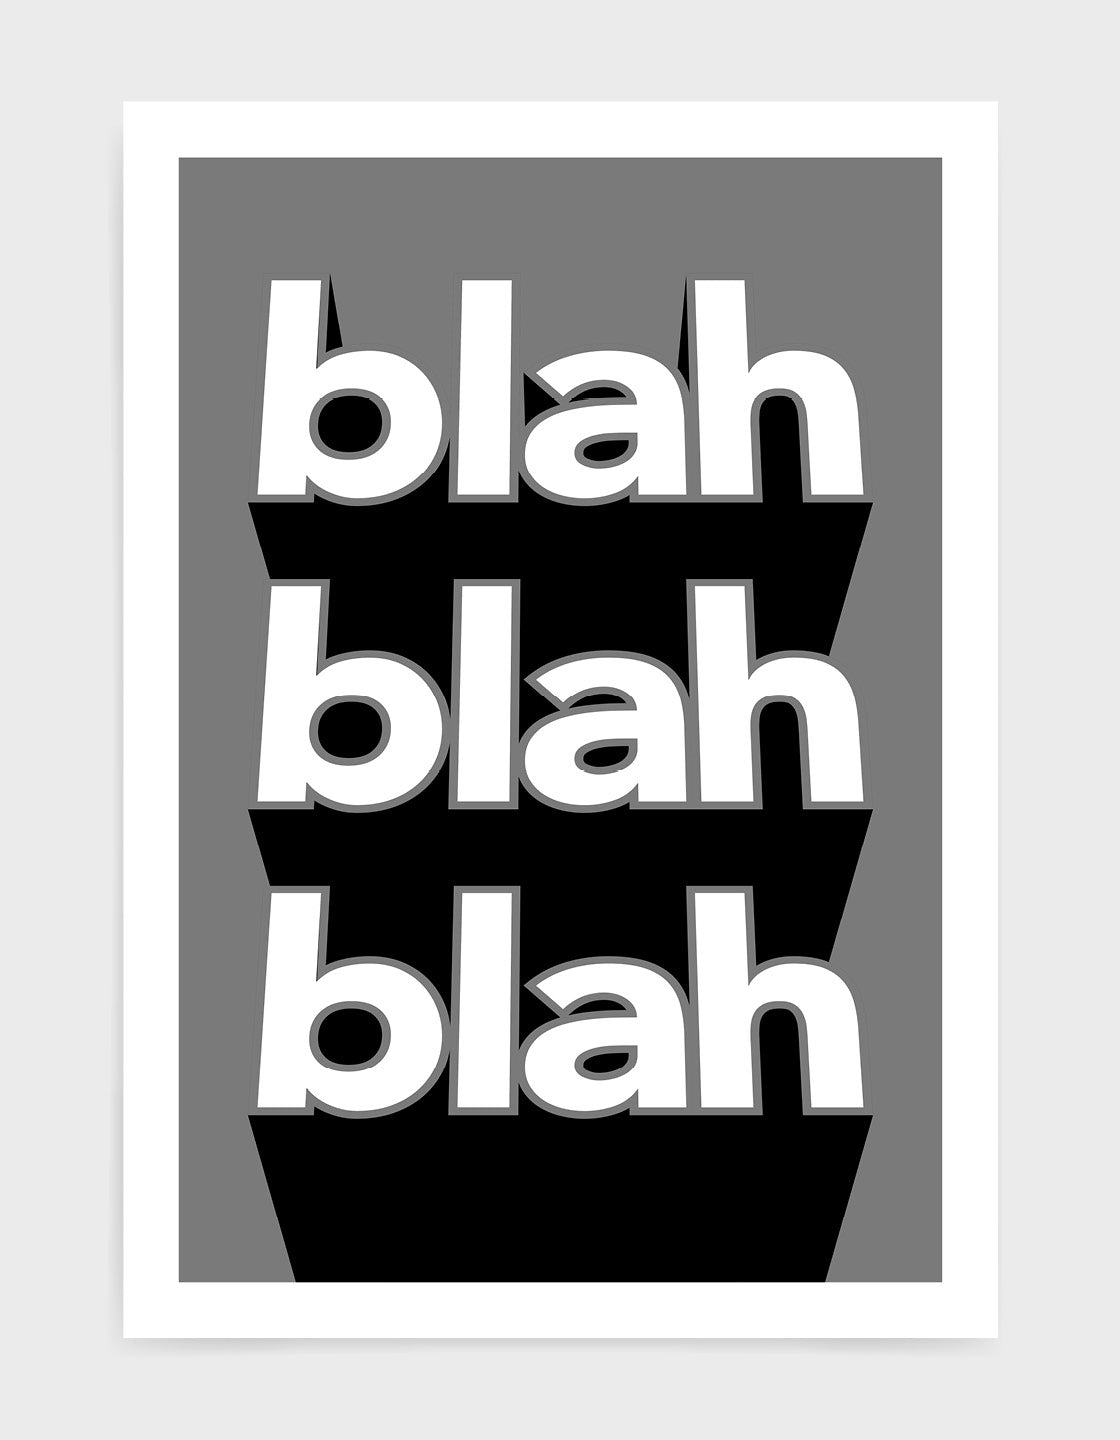 typography print with the words blah blah blah written vertically in bold white text on a black background